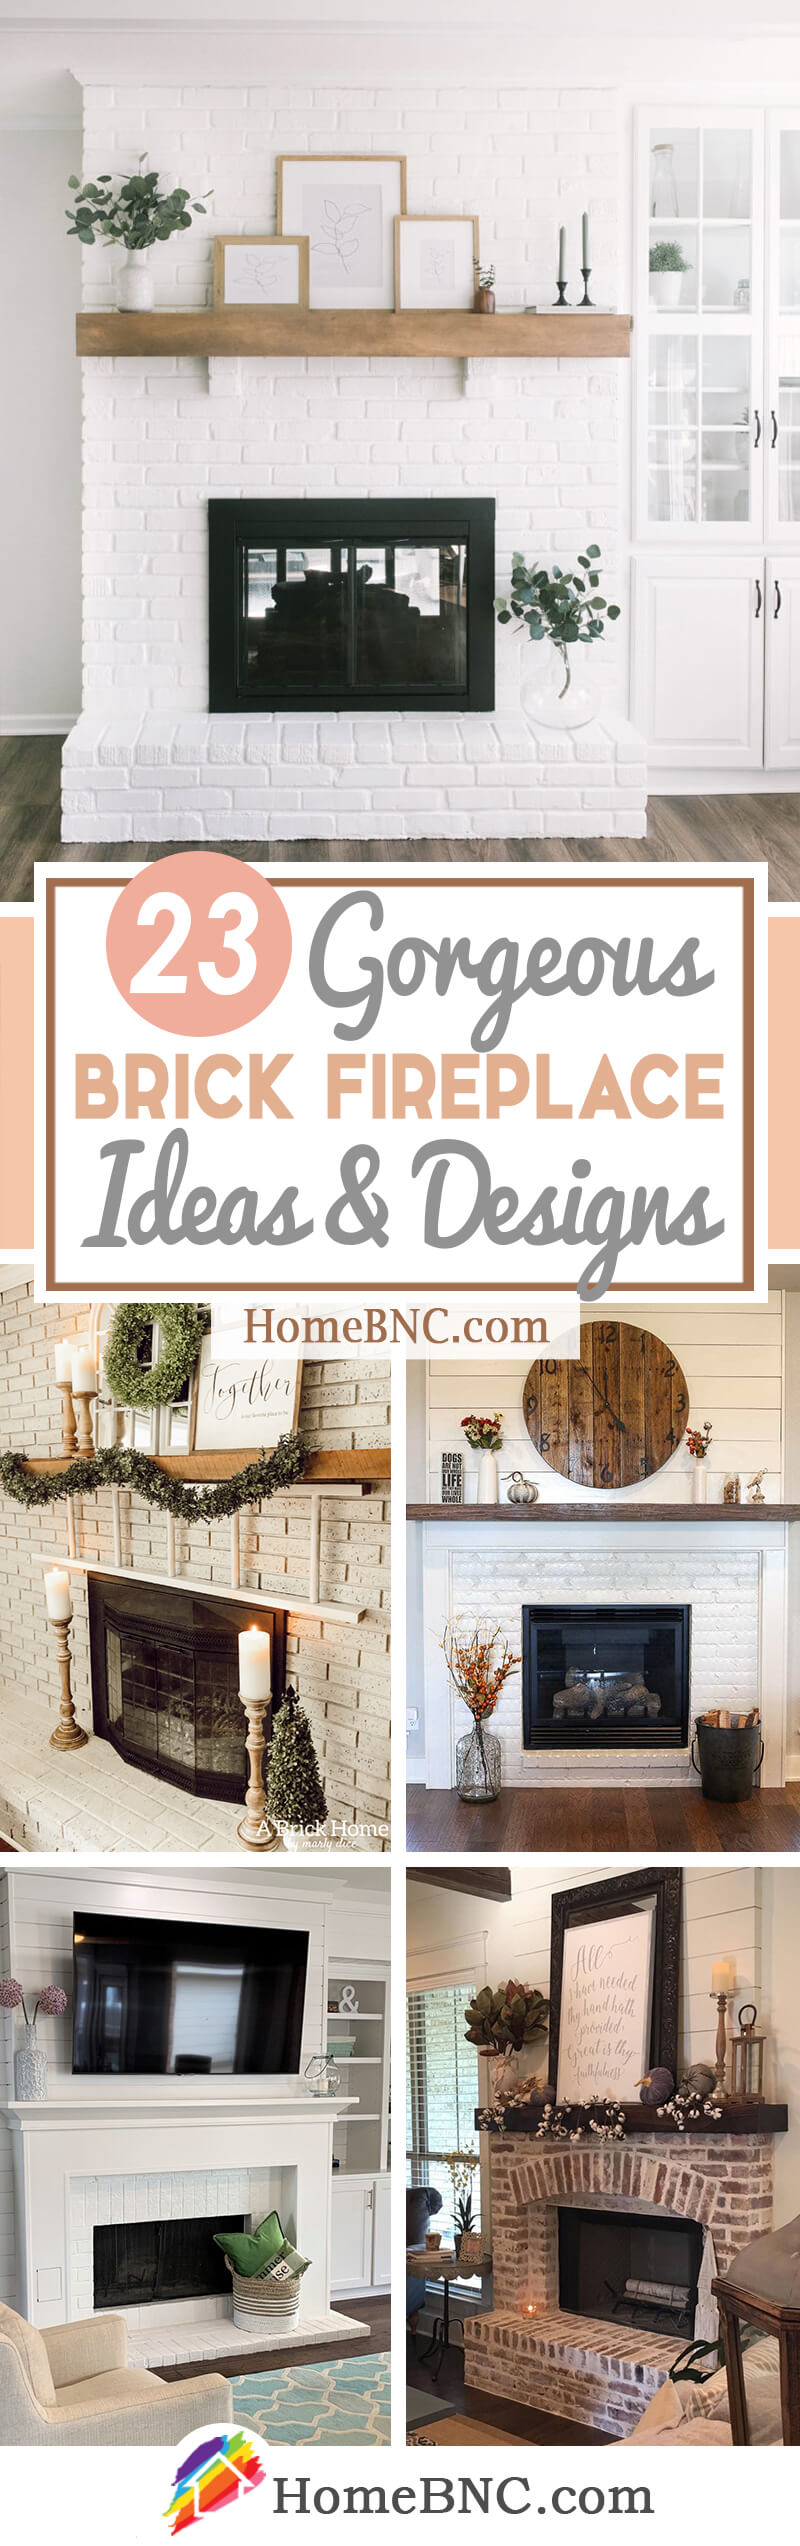 23 Best Brick Fireplace Ideas To Make, How To Change The Look Of A Brick Fireplace